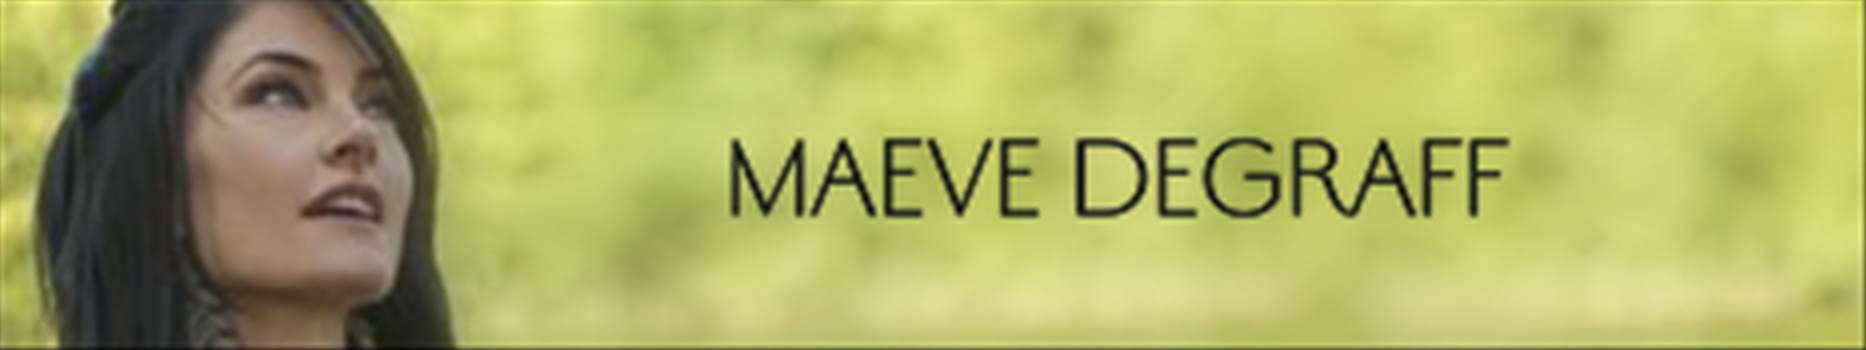 MAEVE-TRACKER.png - 